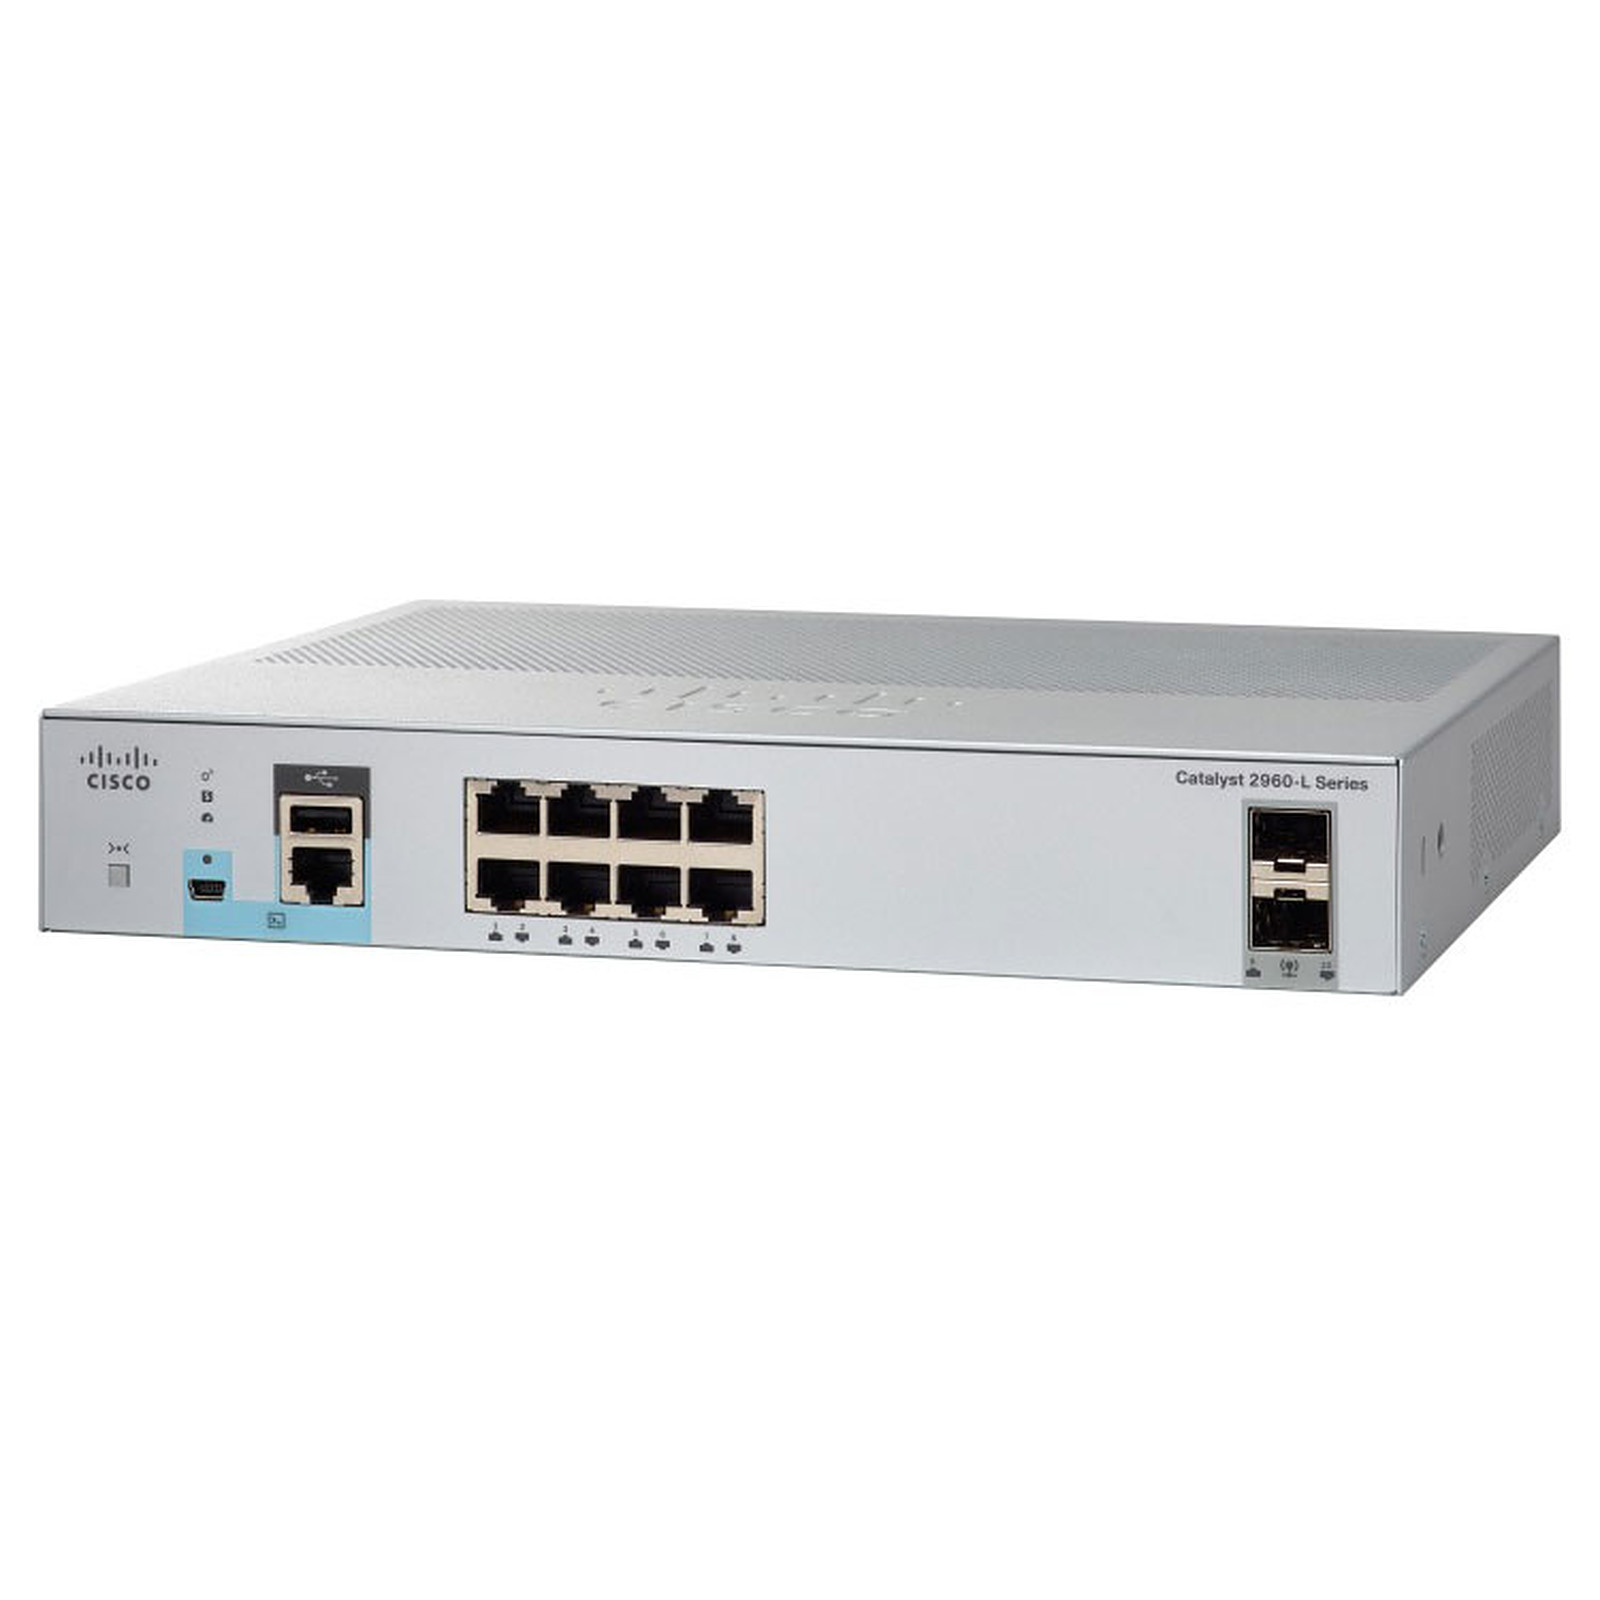 Cisco Catalyst WS-C2960L-SM-8PS - Switch Cisco Systems